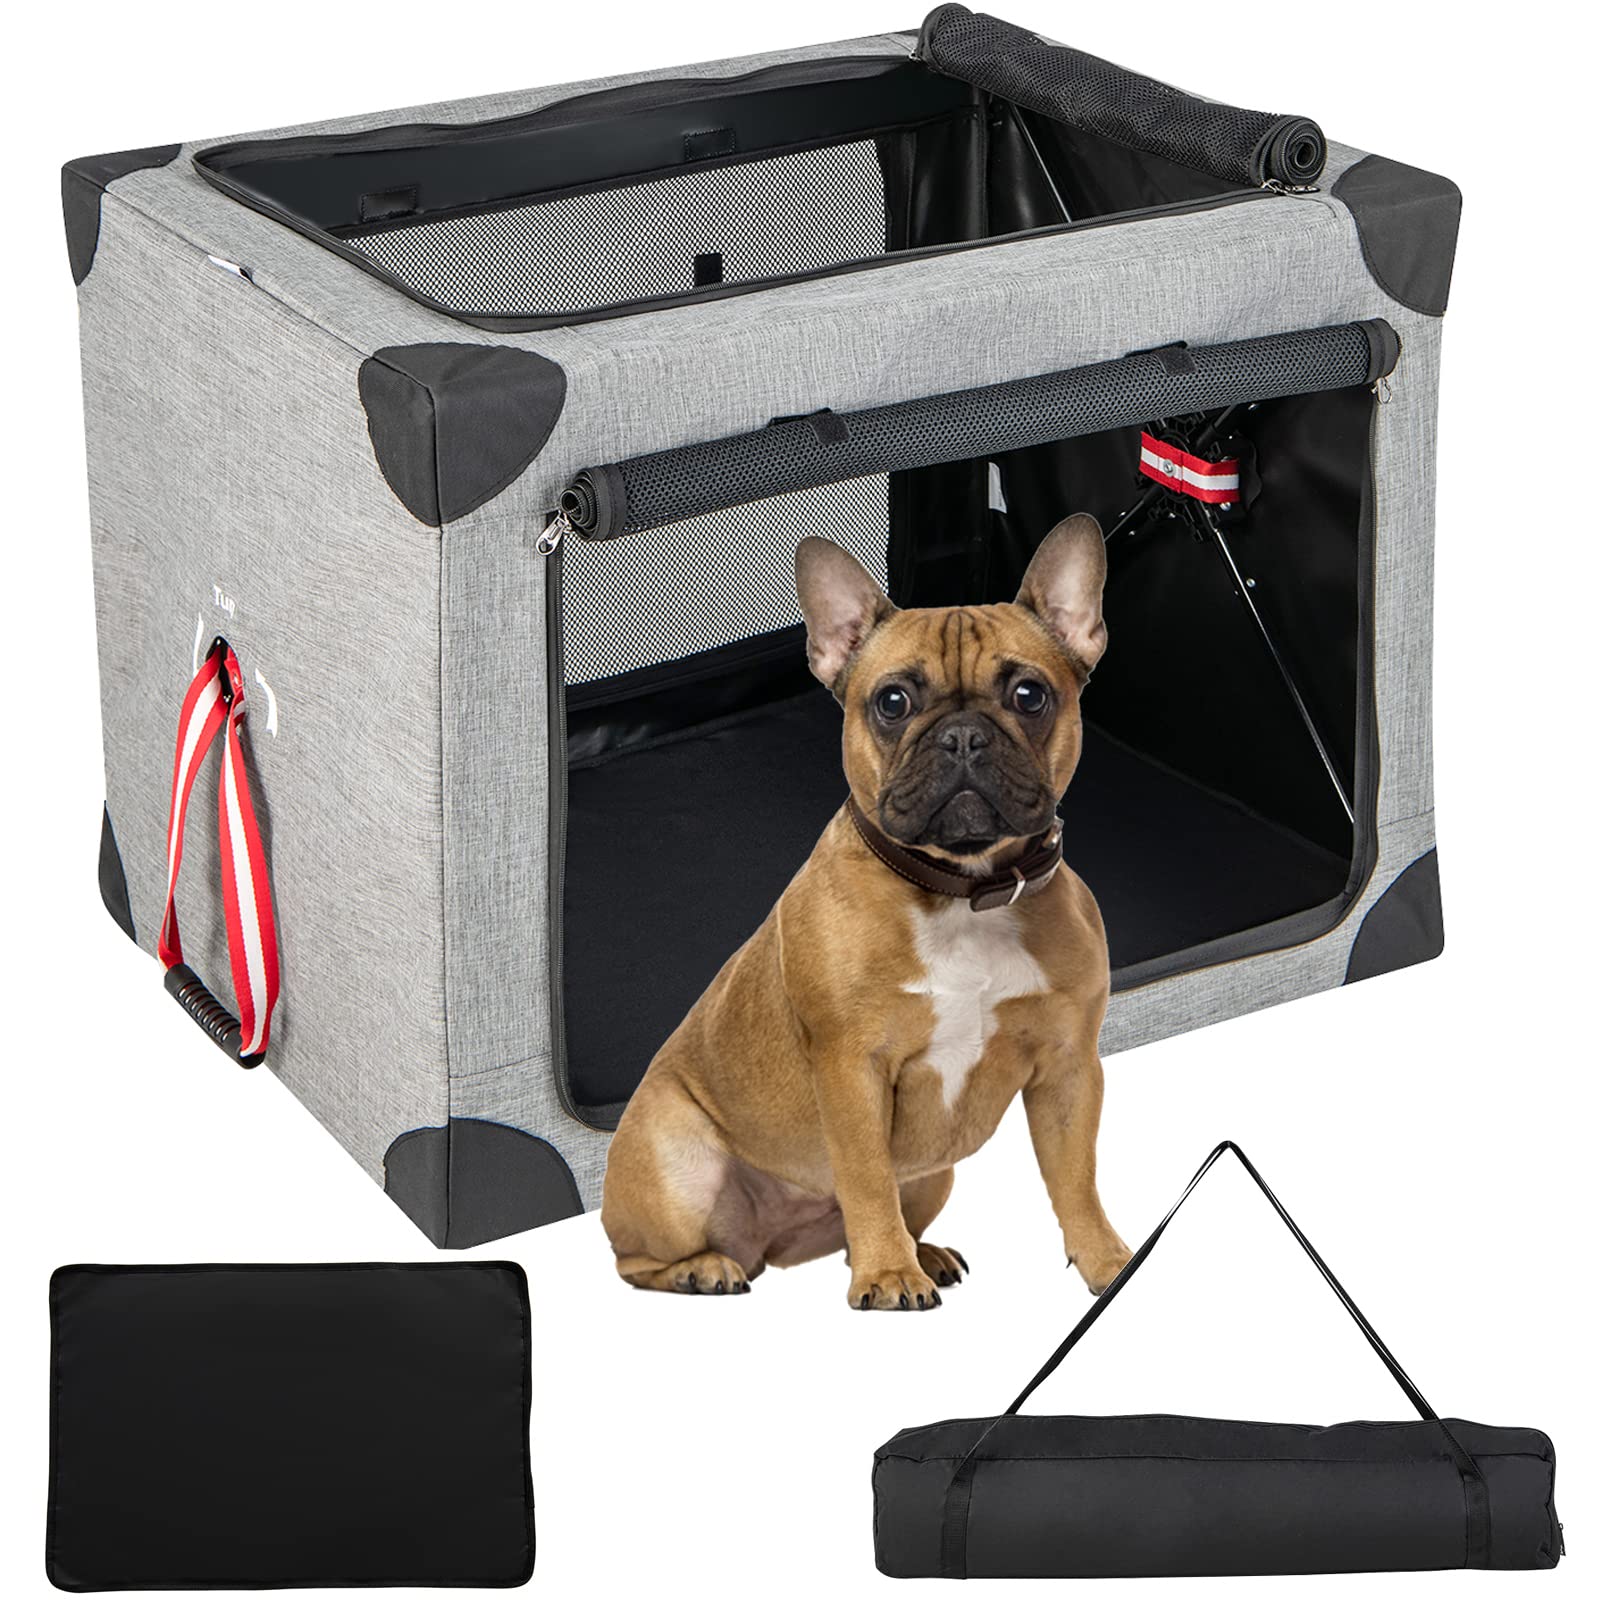 Giantex Folding Dog Soft Crate - Collapsible Pet Carry Case with 3 Mesh Doors